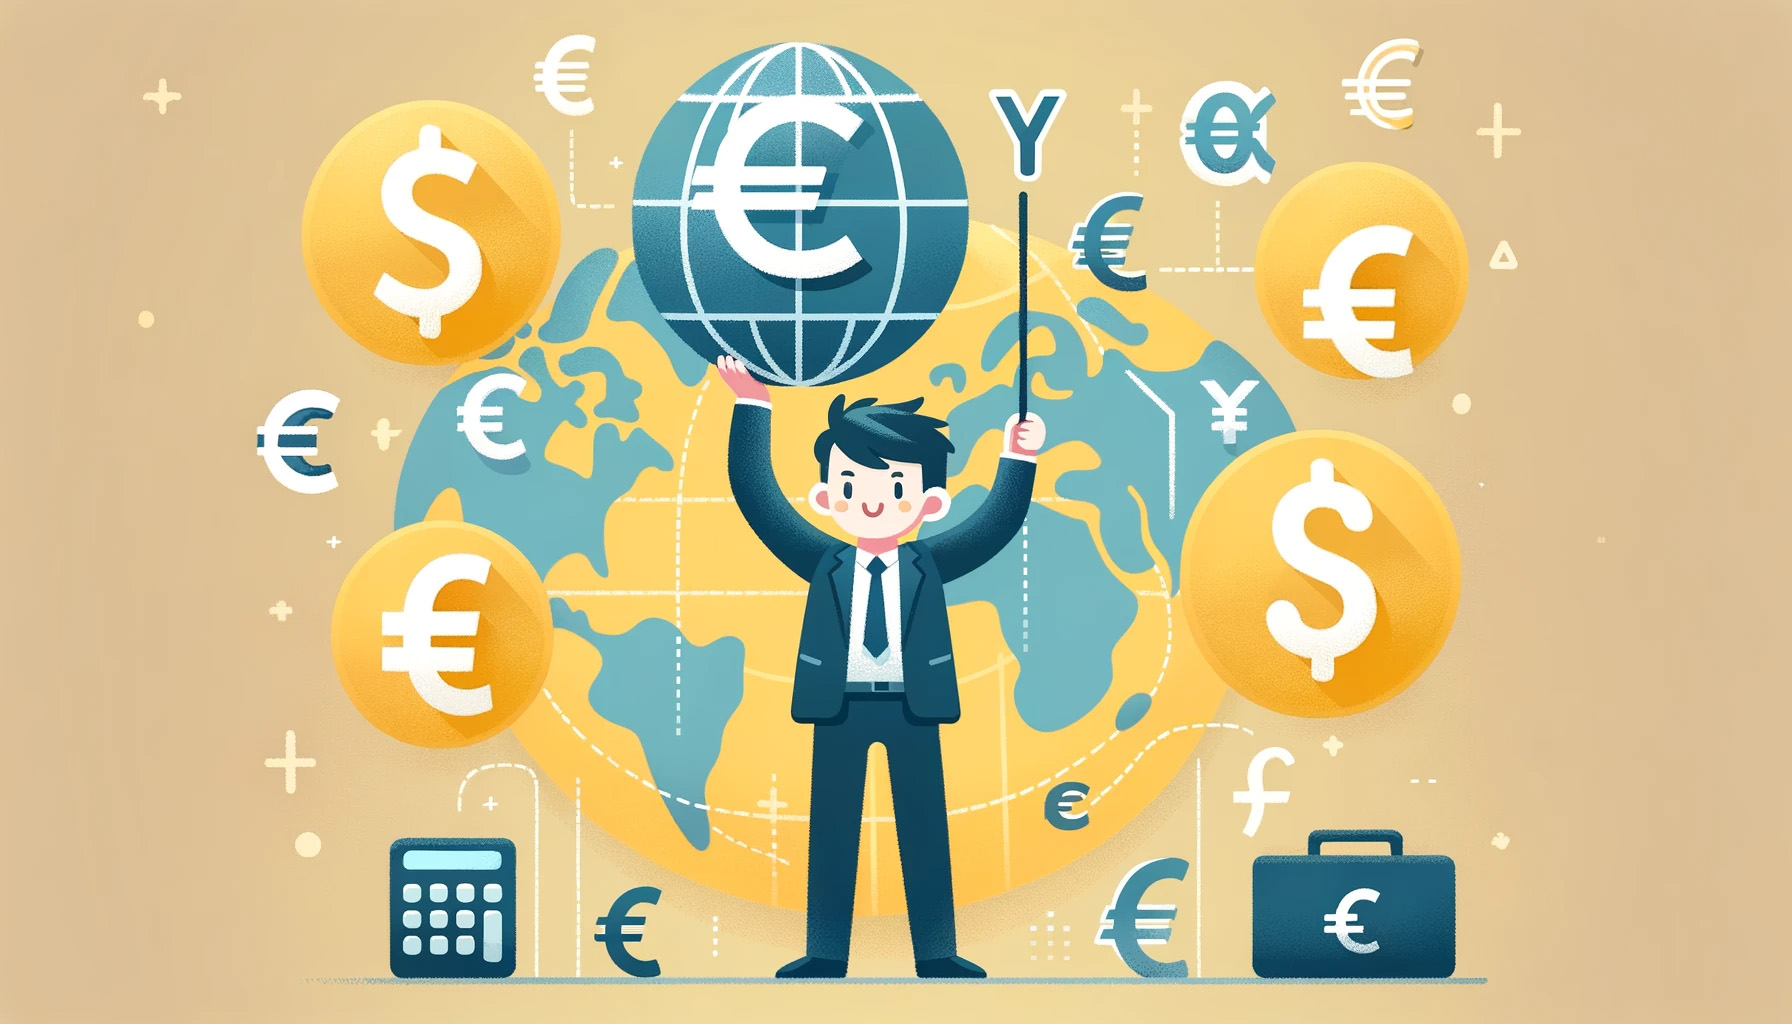 business man holding up a globe of the Earth with various currency symbols in the background, US dollars, Euros, Yen